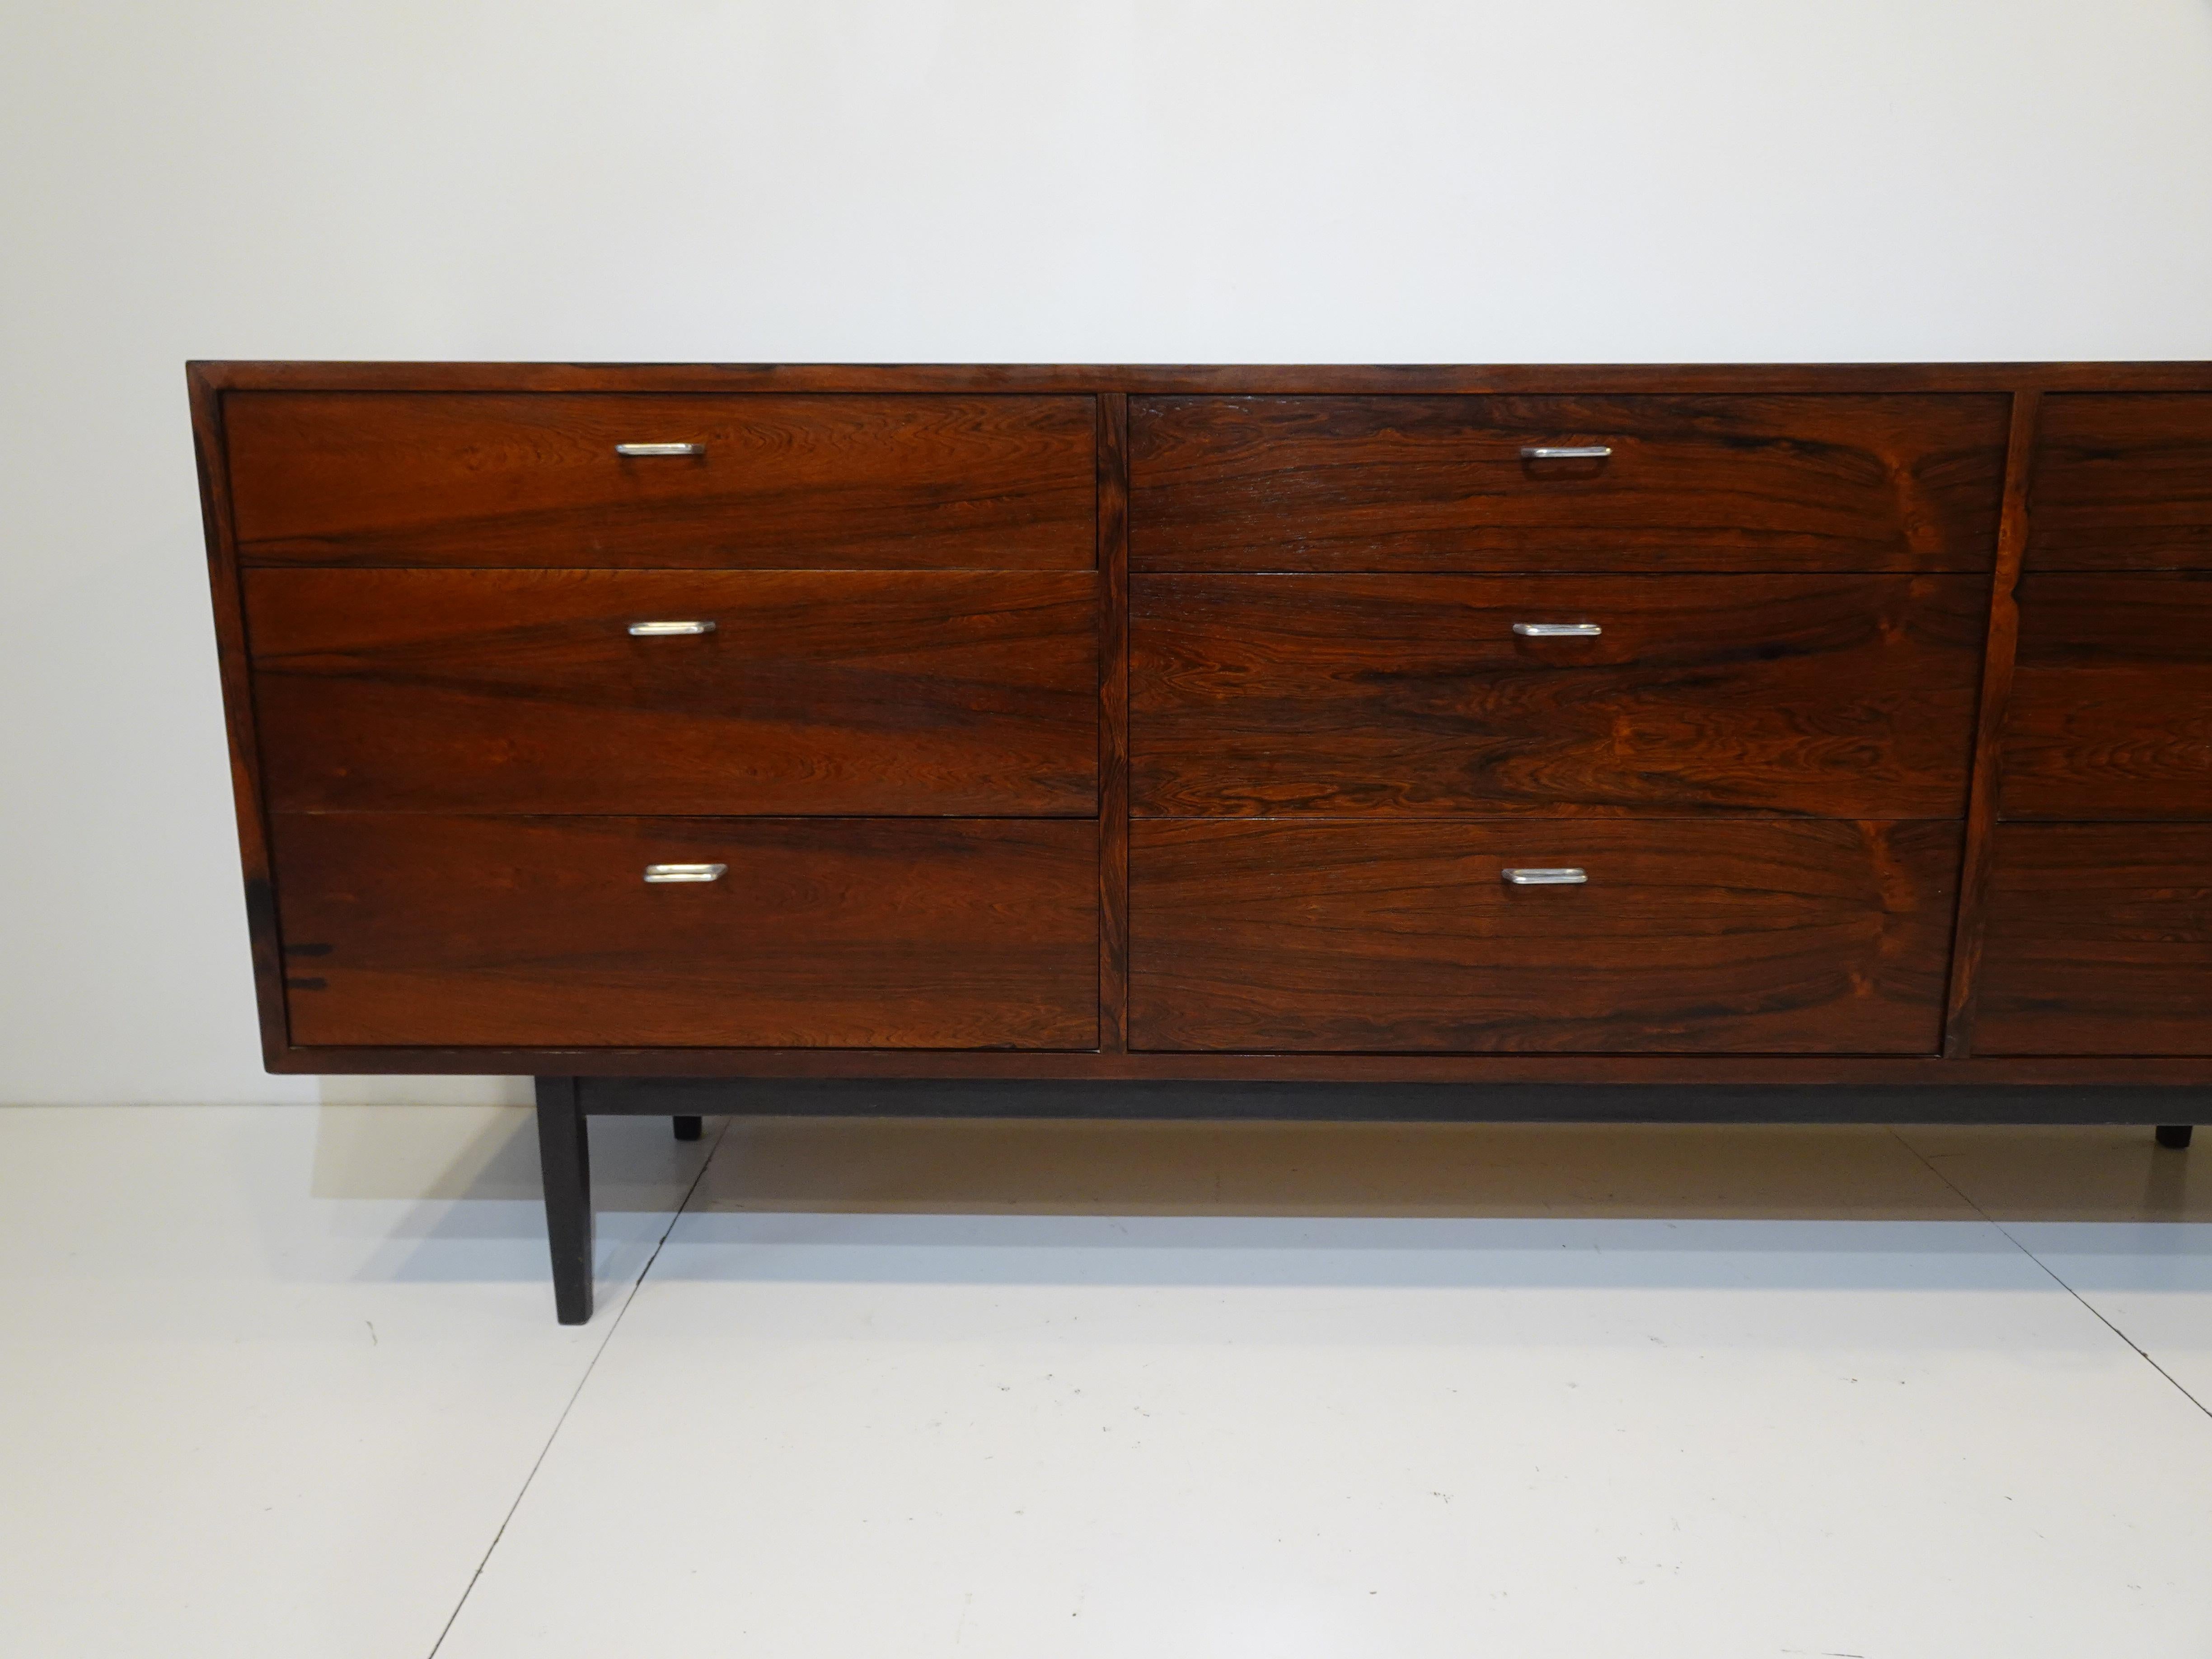 A nine drawer beautifully grained rich and dark Brazilian rosewood dresser sitting on a satin black wood frame and legs. The chest has cast polished metal pulls with oak interiors to the drawers giving the chest a contrasting look with plenty of